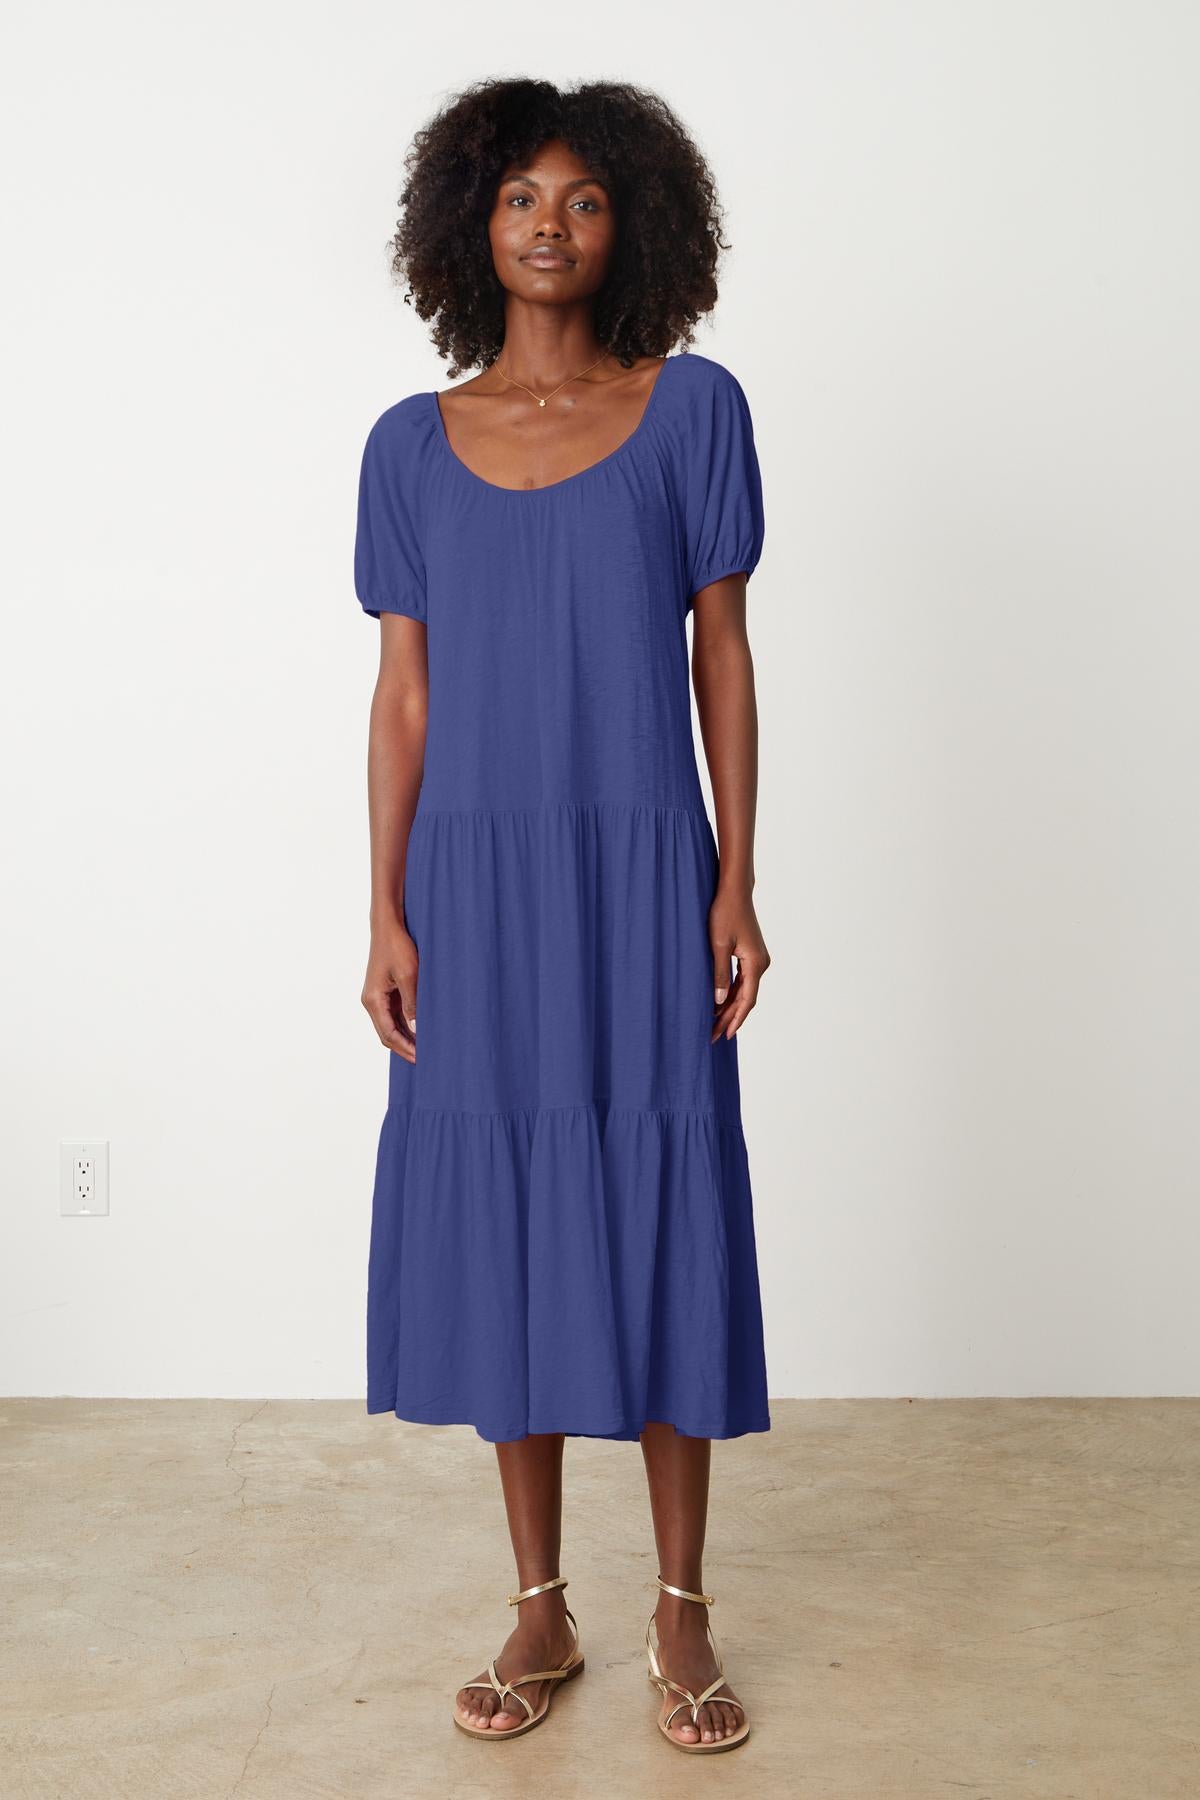   A woman wearing a blue JANE SCOOP NECK TIERED DRESS by Velvet by Graham & Spencer and sandals. 